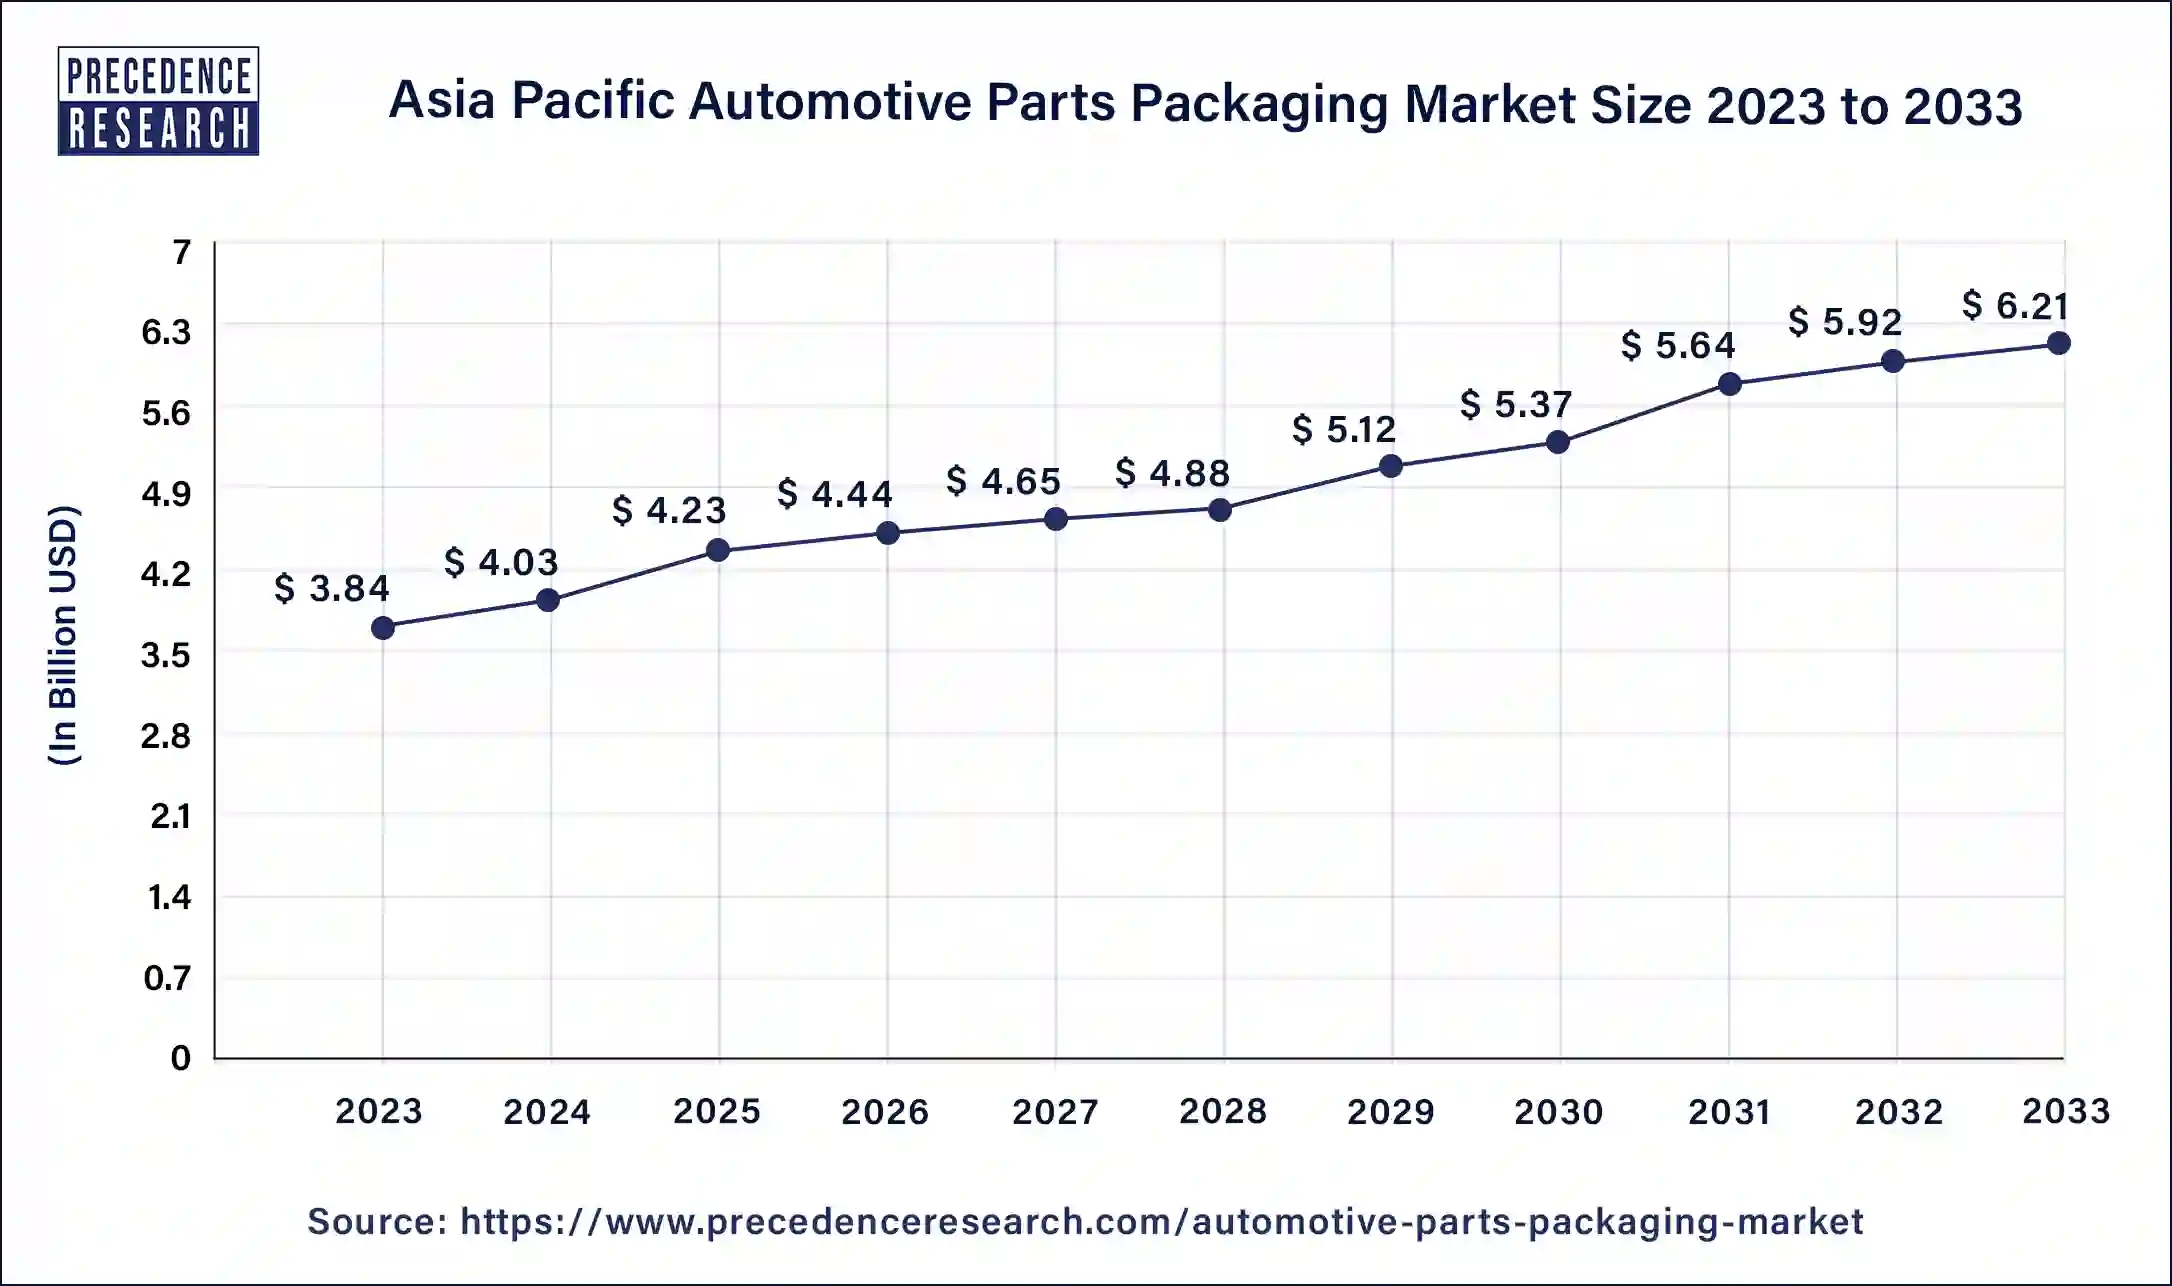 Asia Pacific Automotive Parts Packaging Market Size 2024 to 2033